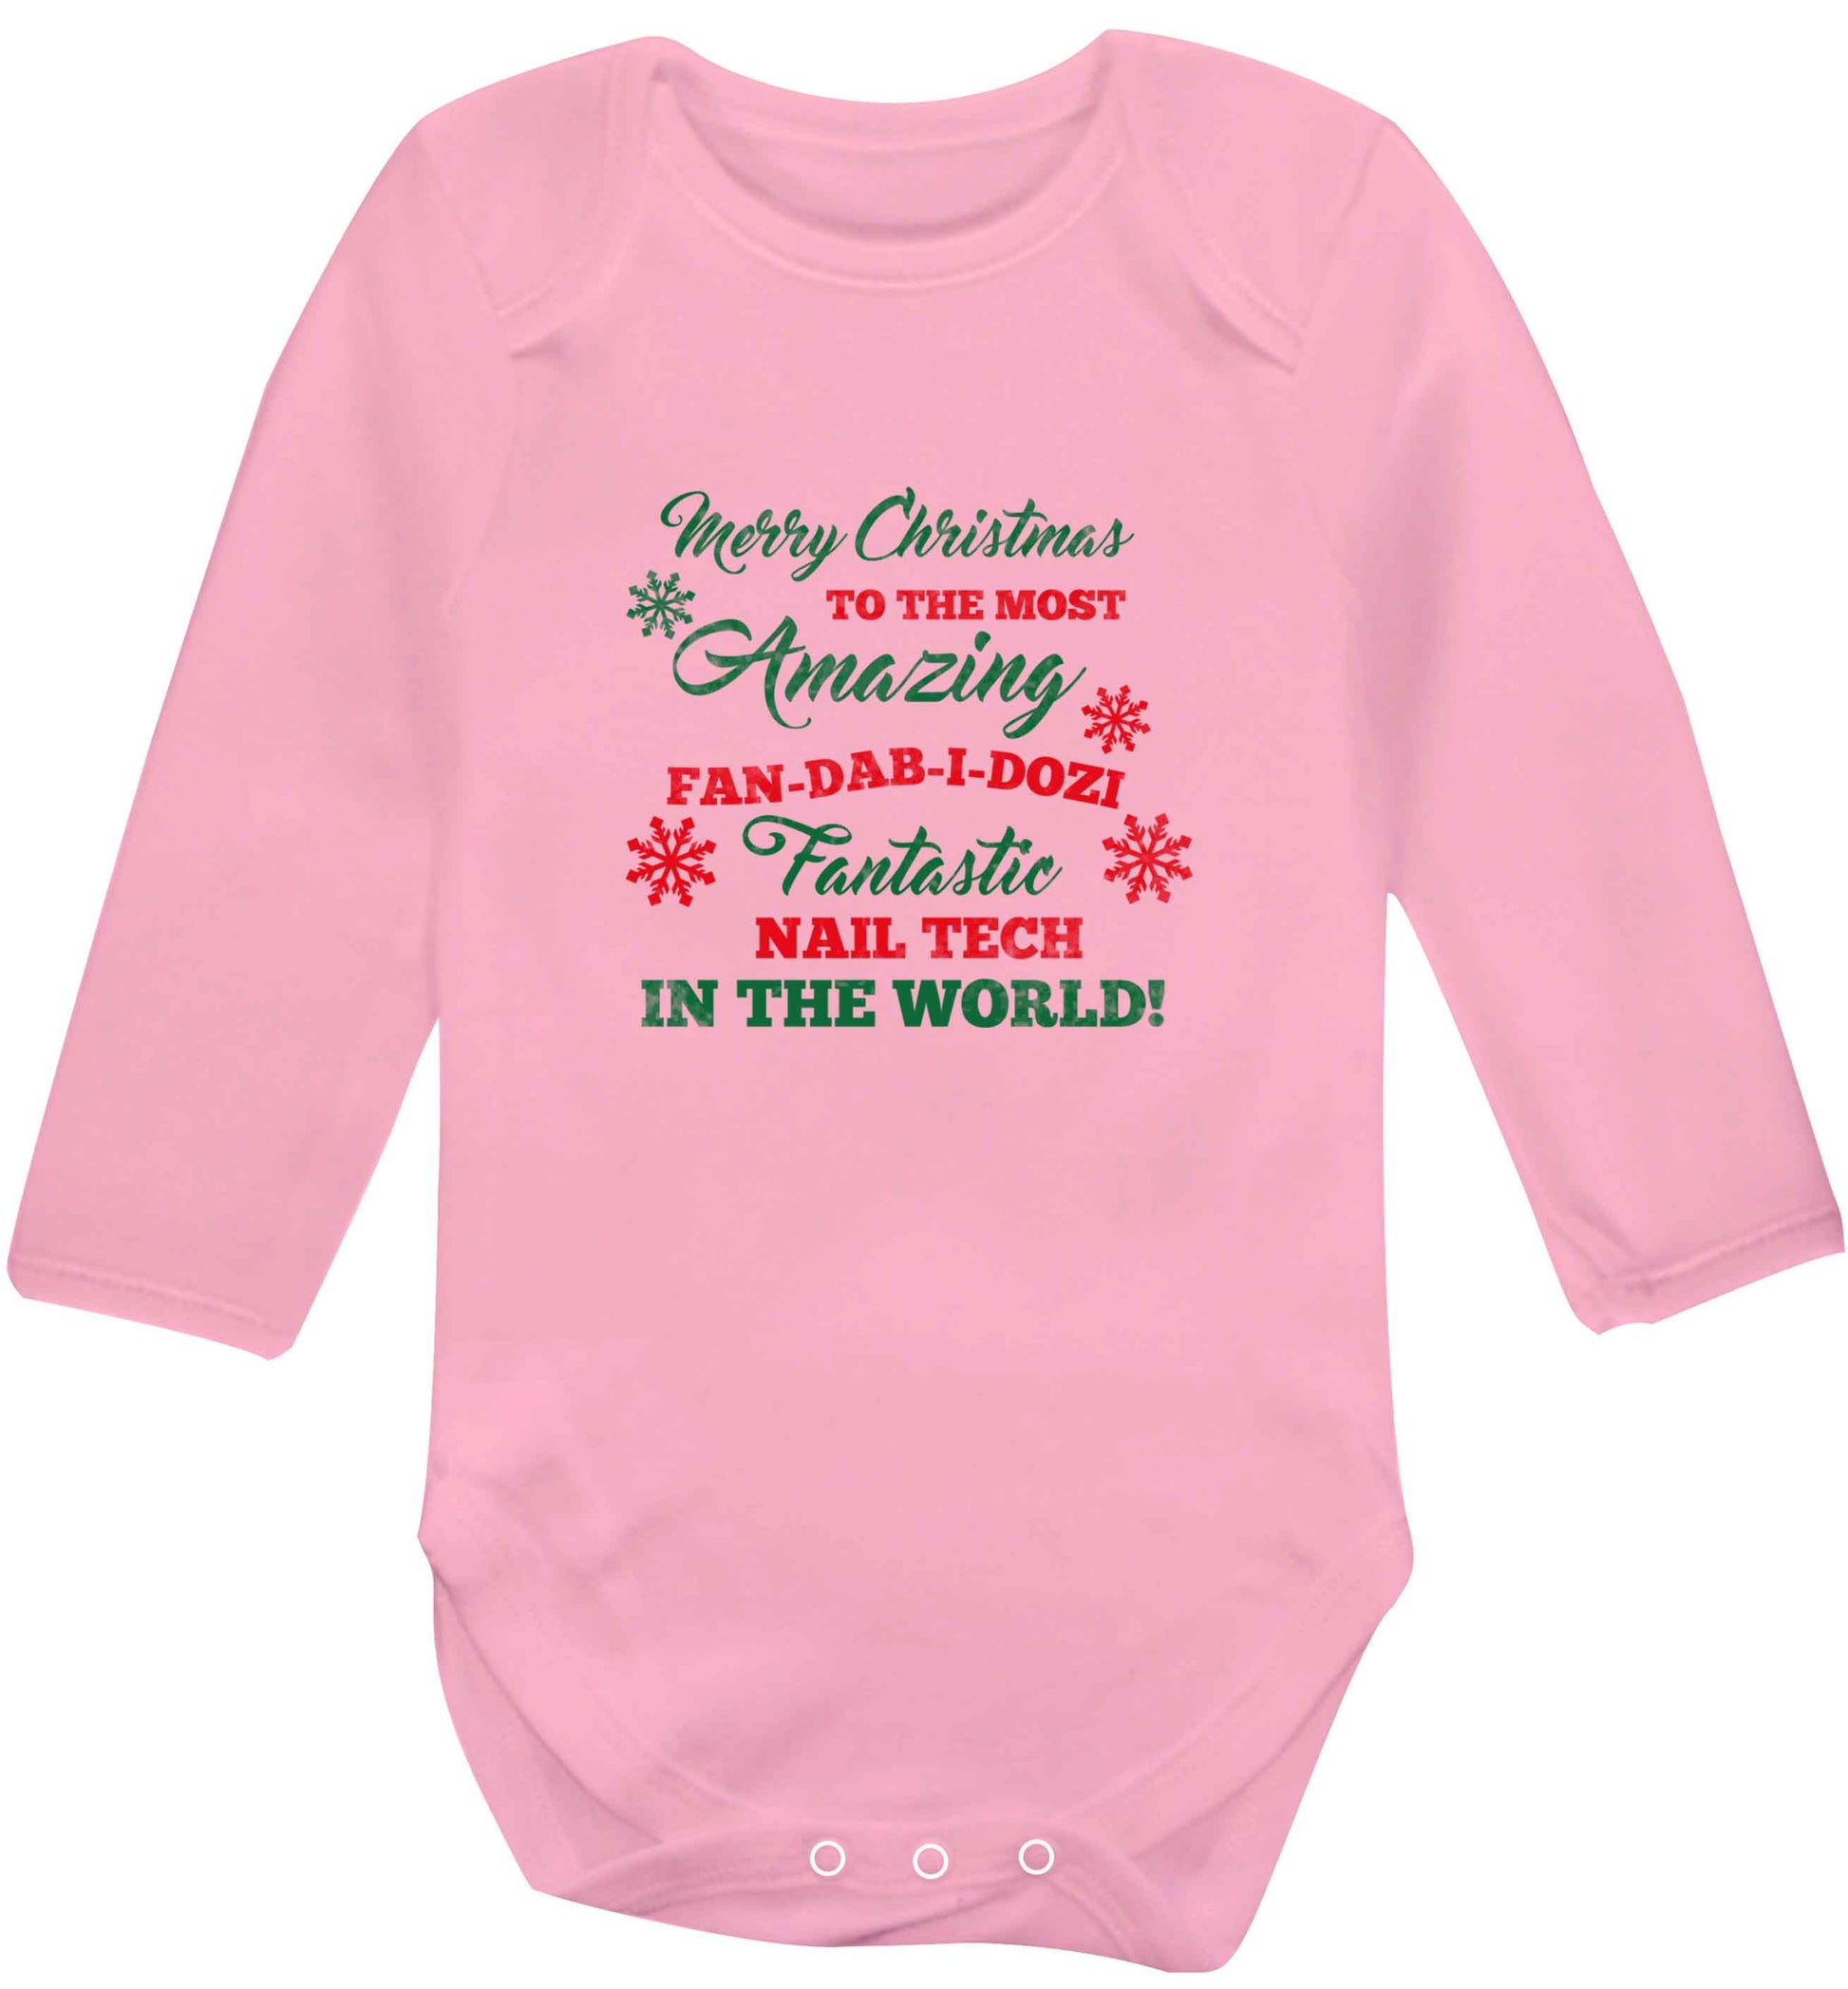 Merry Christmas to the most amazing fan-dab-i-dozi fantasic nail technician in the world baby vest long sleeved pale pink 6-12 months